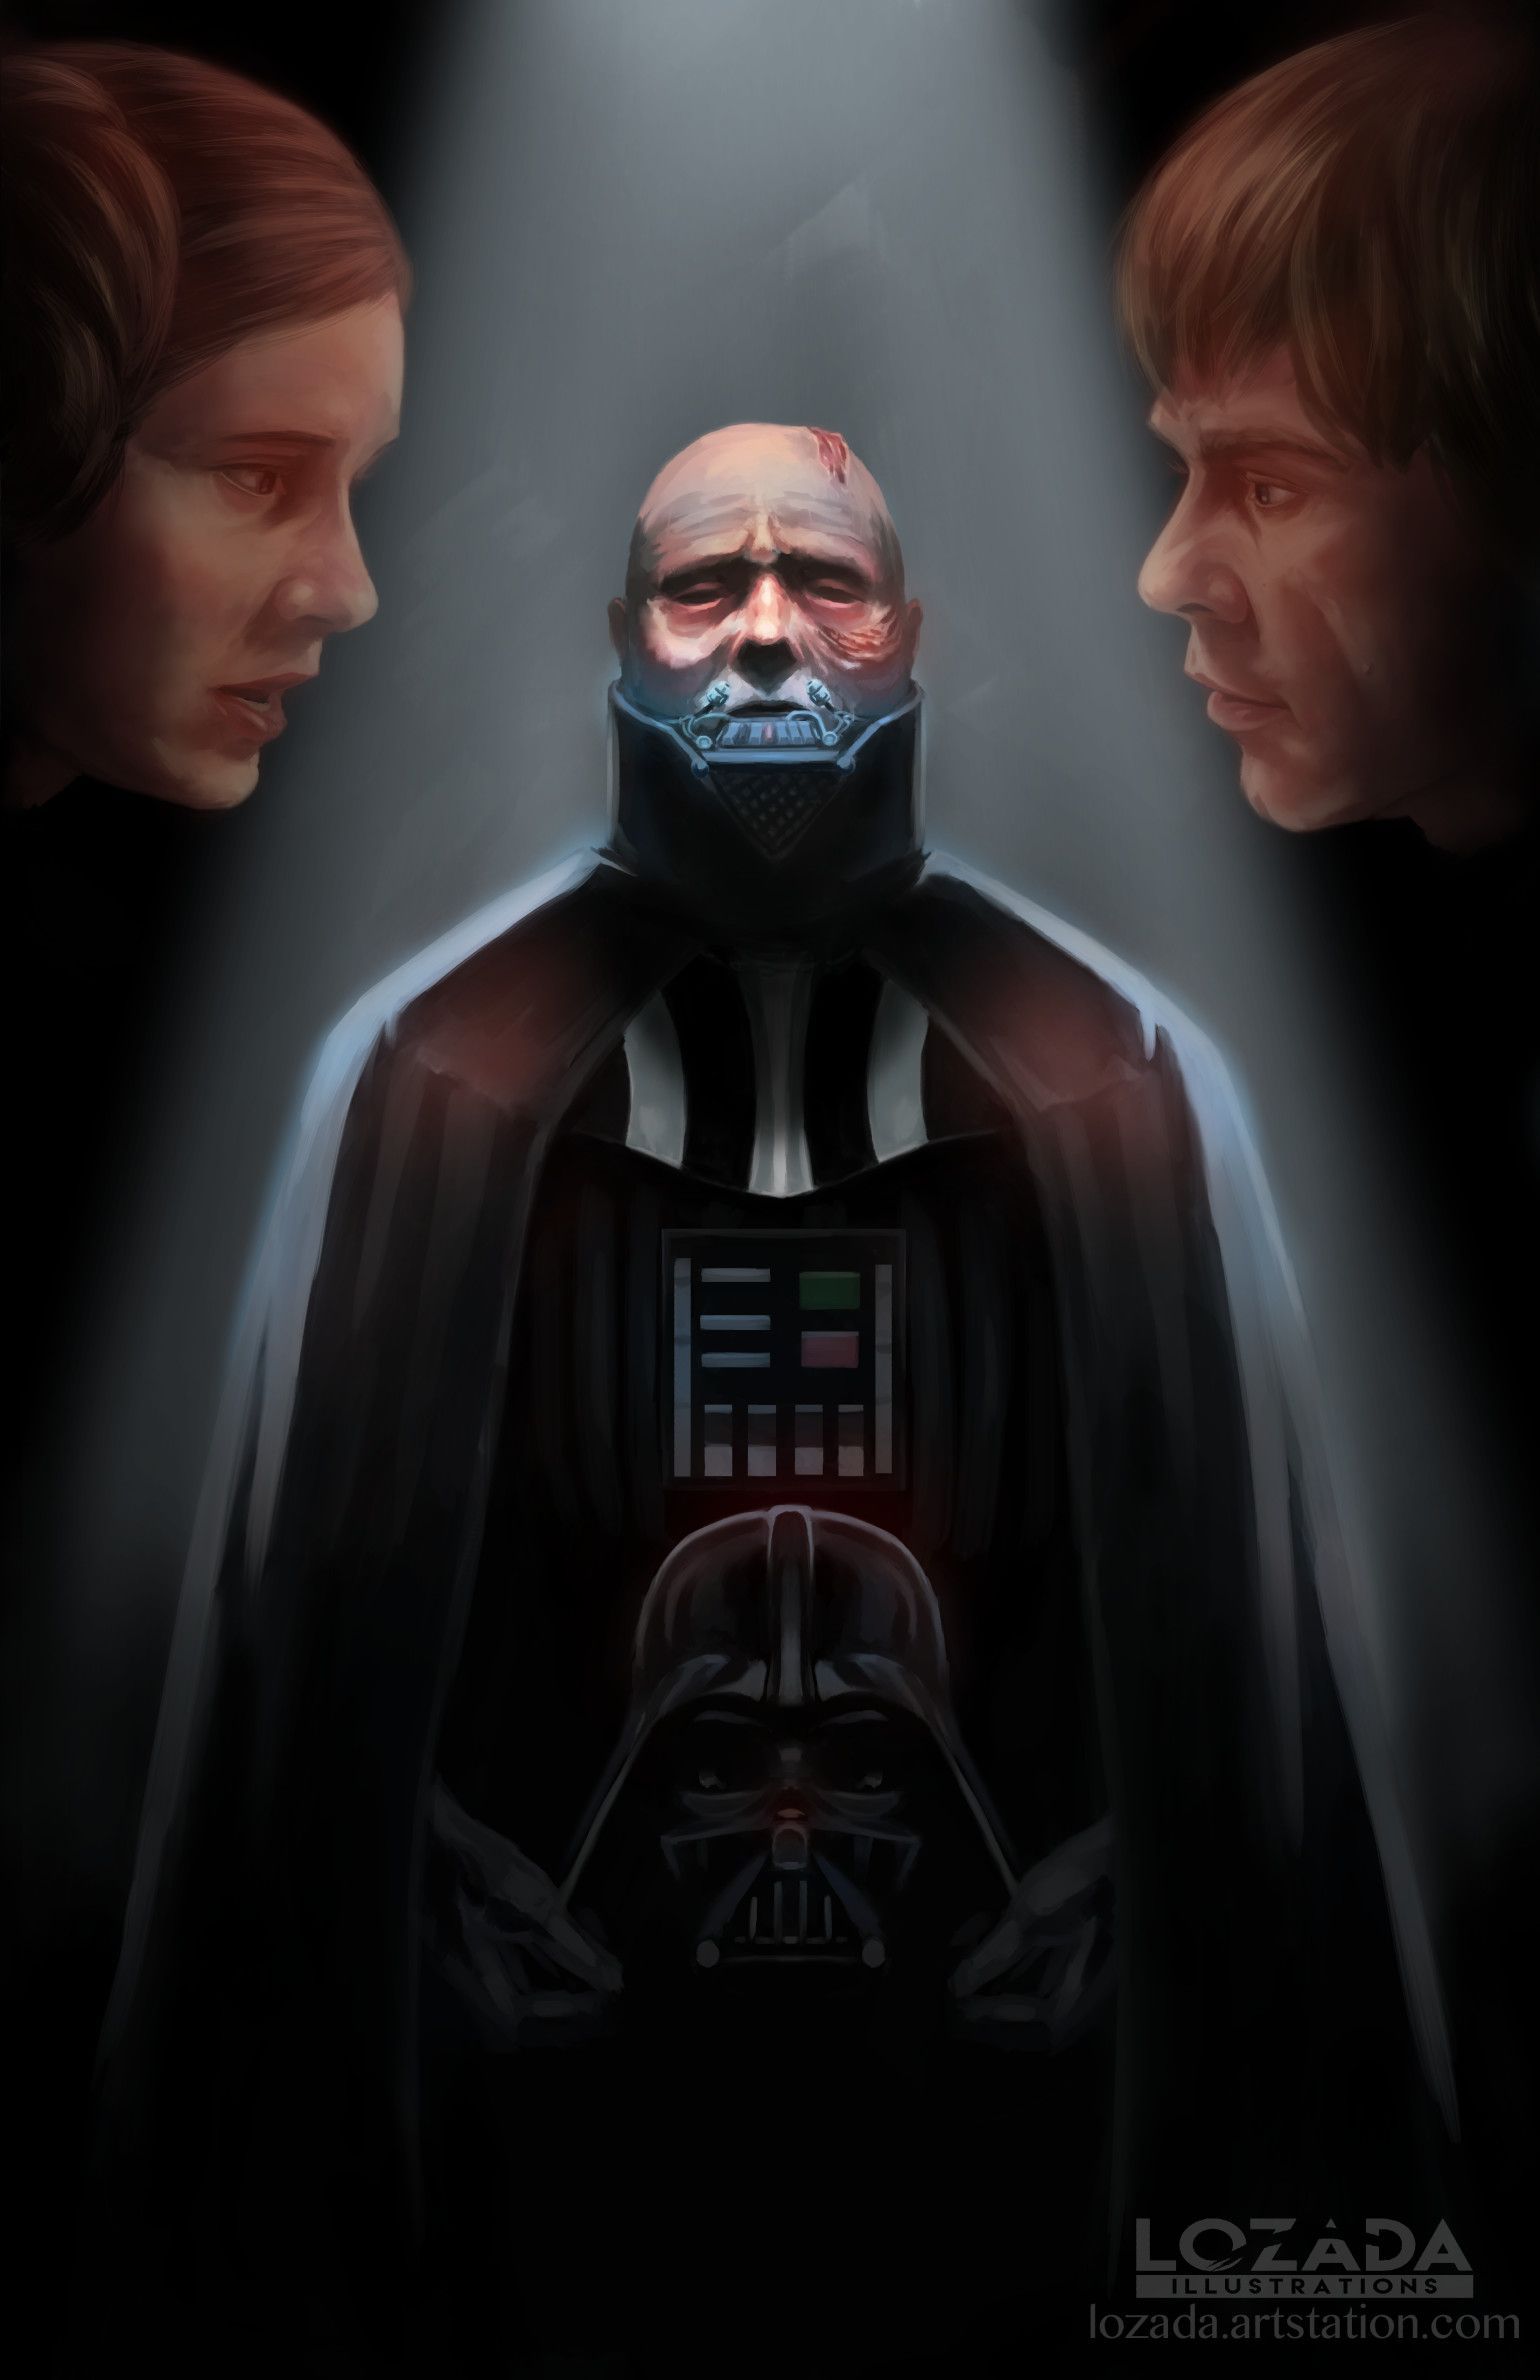 Darth Vader unmasked, Anthony Lozada. Star wars characters picture, Funny star wars memes, Star wars image